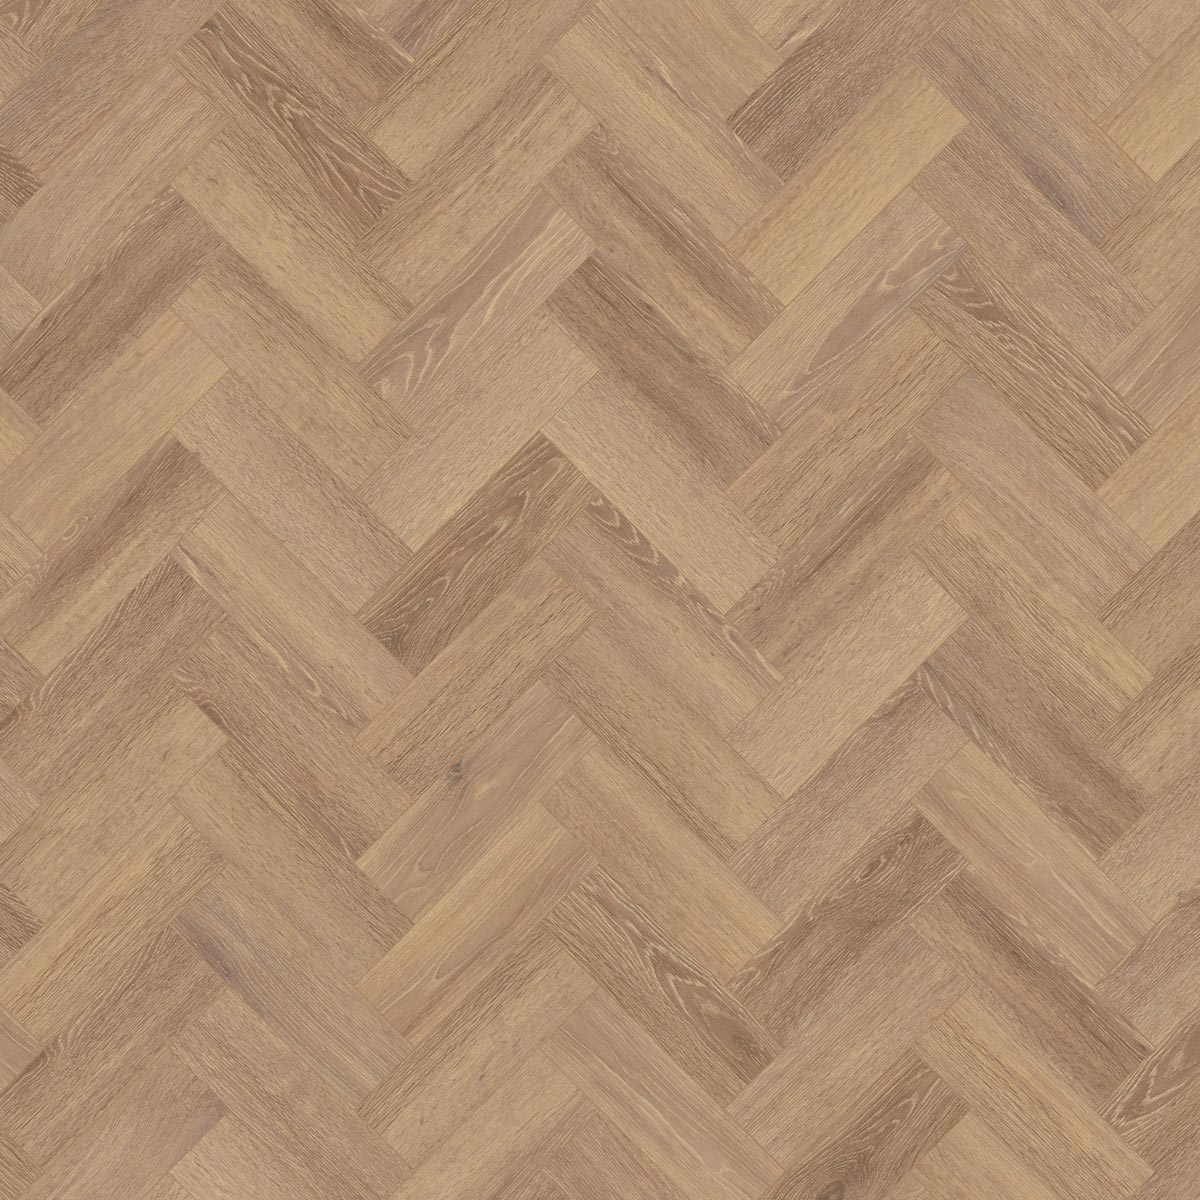 Mulled Oak in Small Parquet